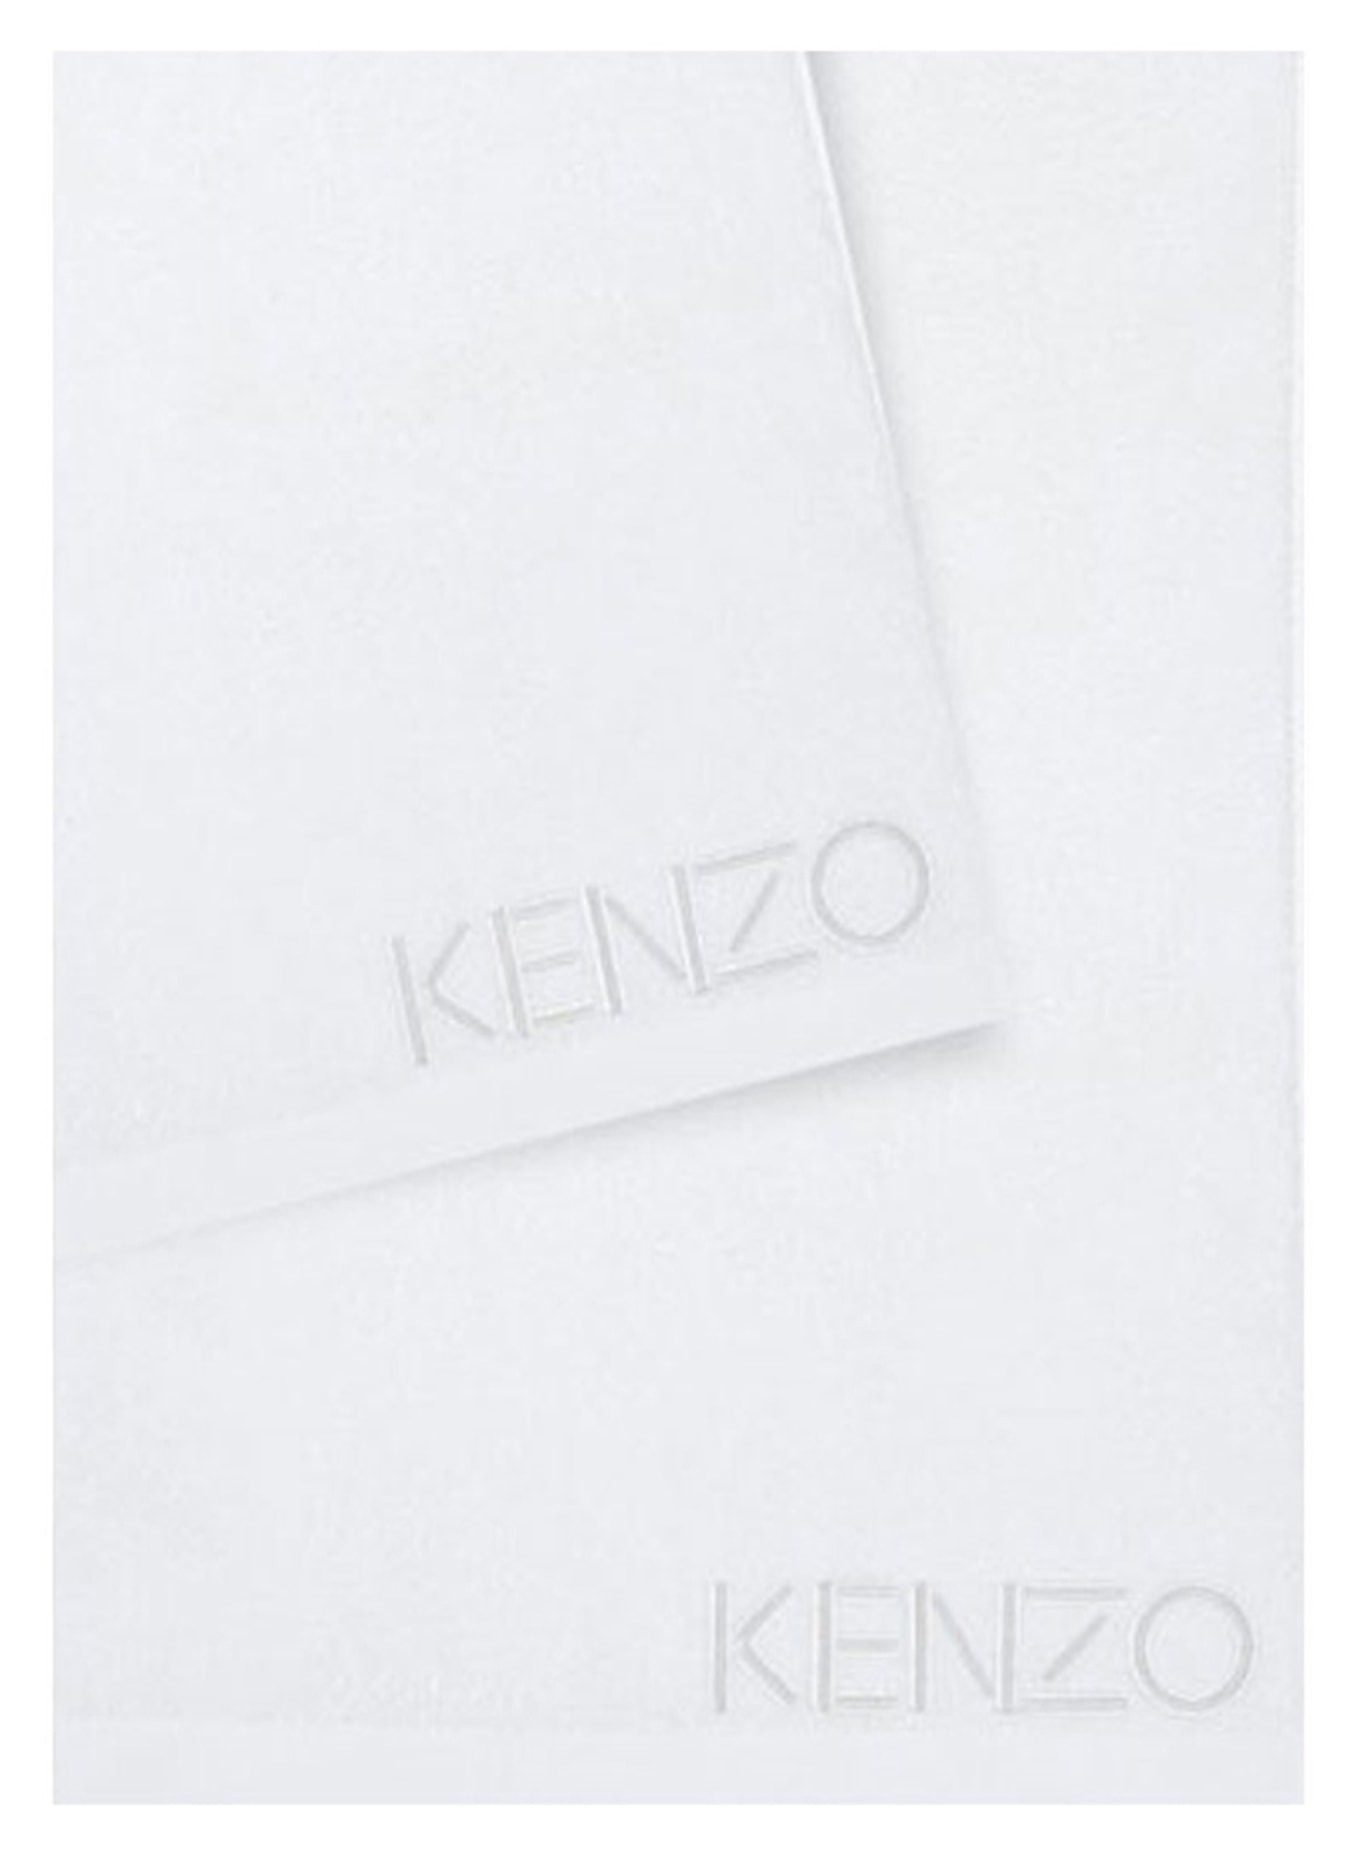 KENZO HOME Handtuch ICONIC, Farbe: WEISS (Bild 9)